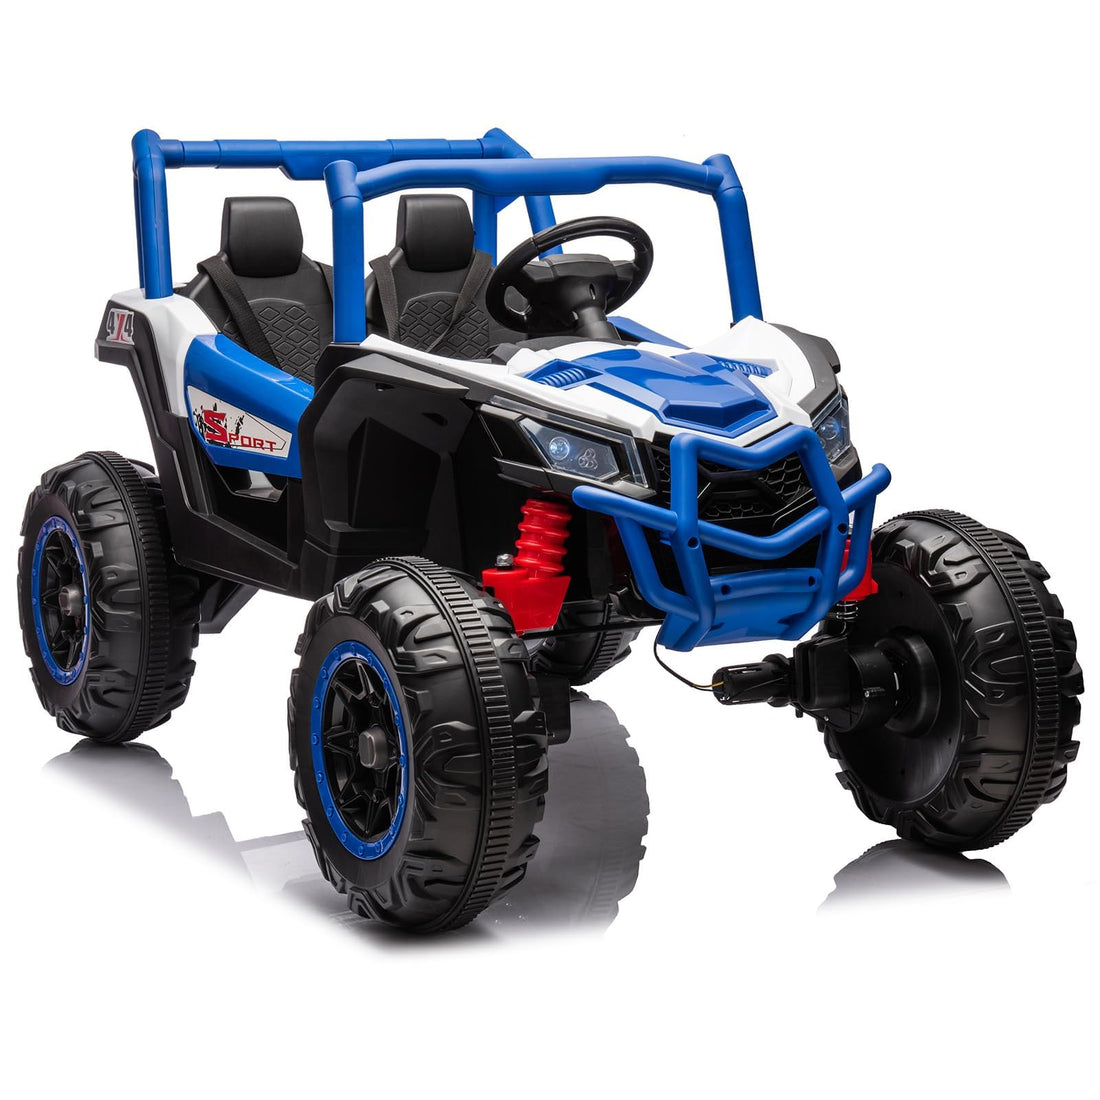 2 Seater Ride on Car,12V Battery Powered Off-Road UTV Toy,Electric Car with Remote Control,Metal Frame,EVA Wheels,LED,Spring Suspension for 3-8 Boys&Girls